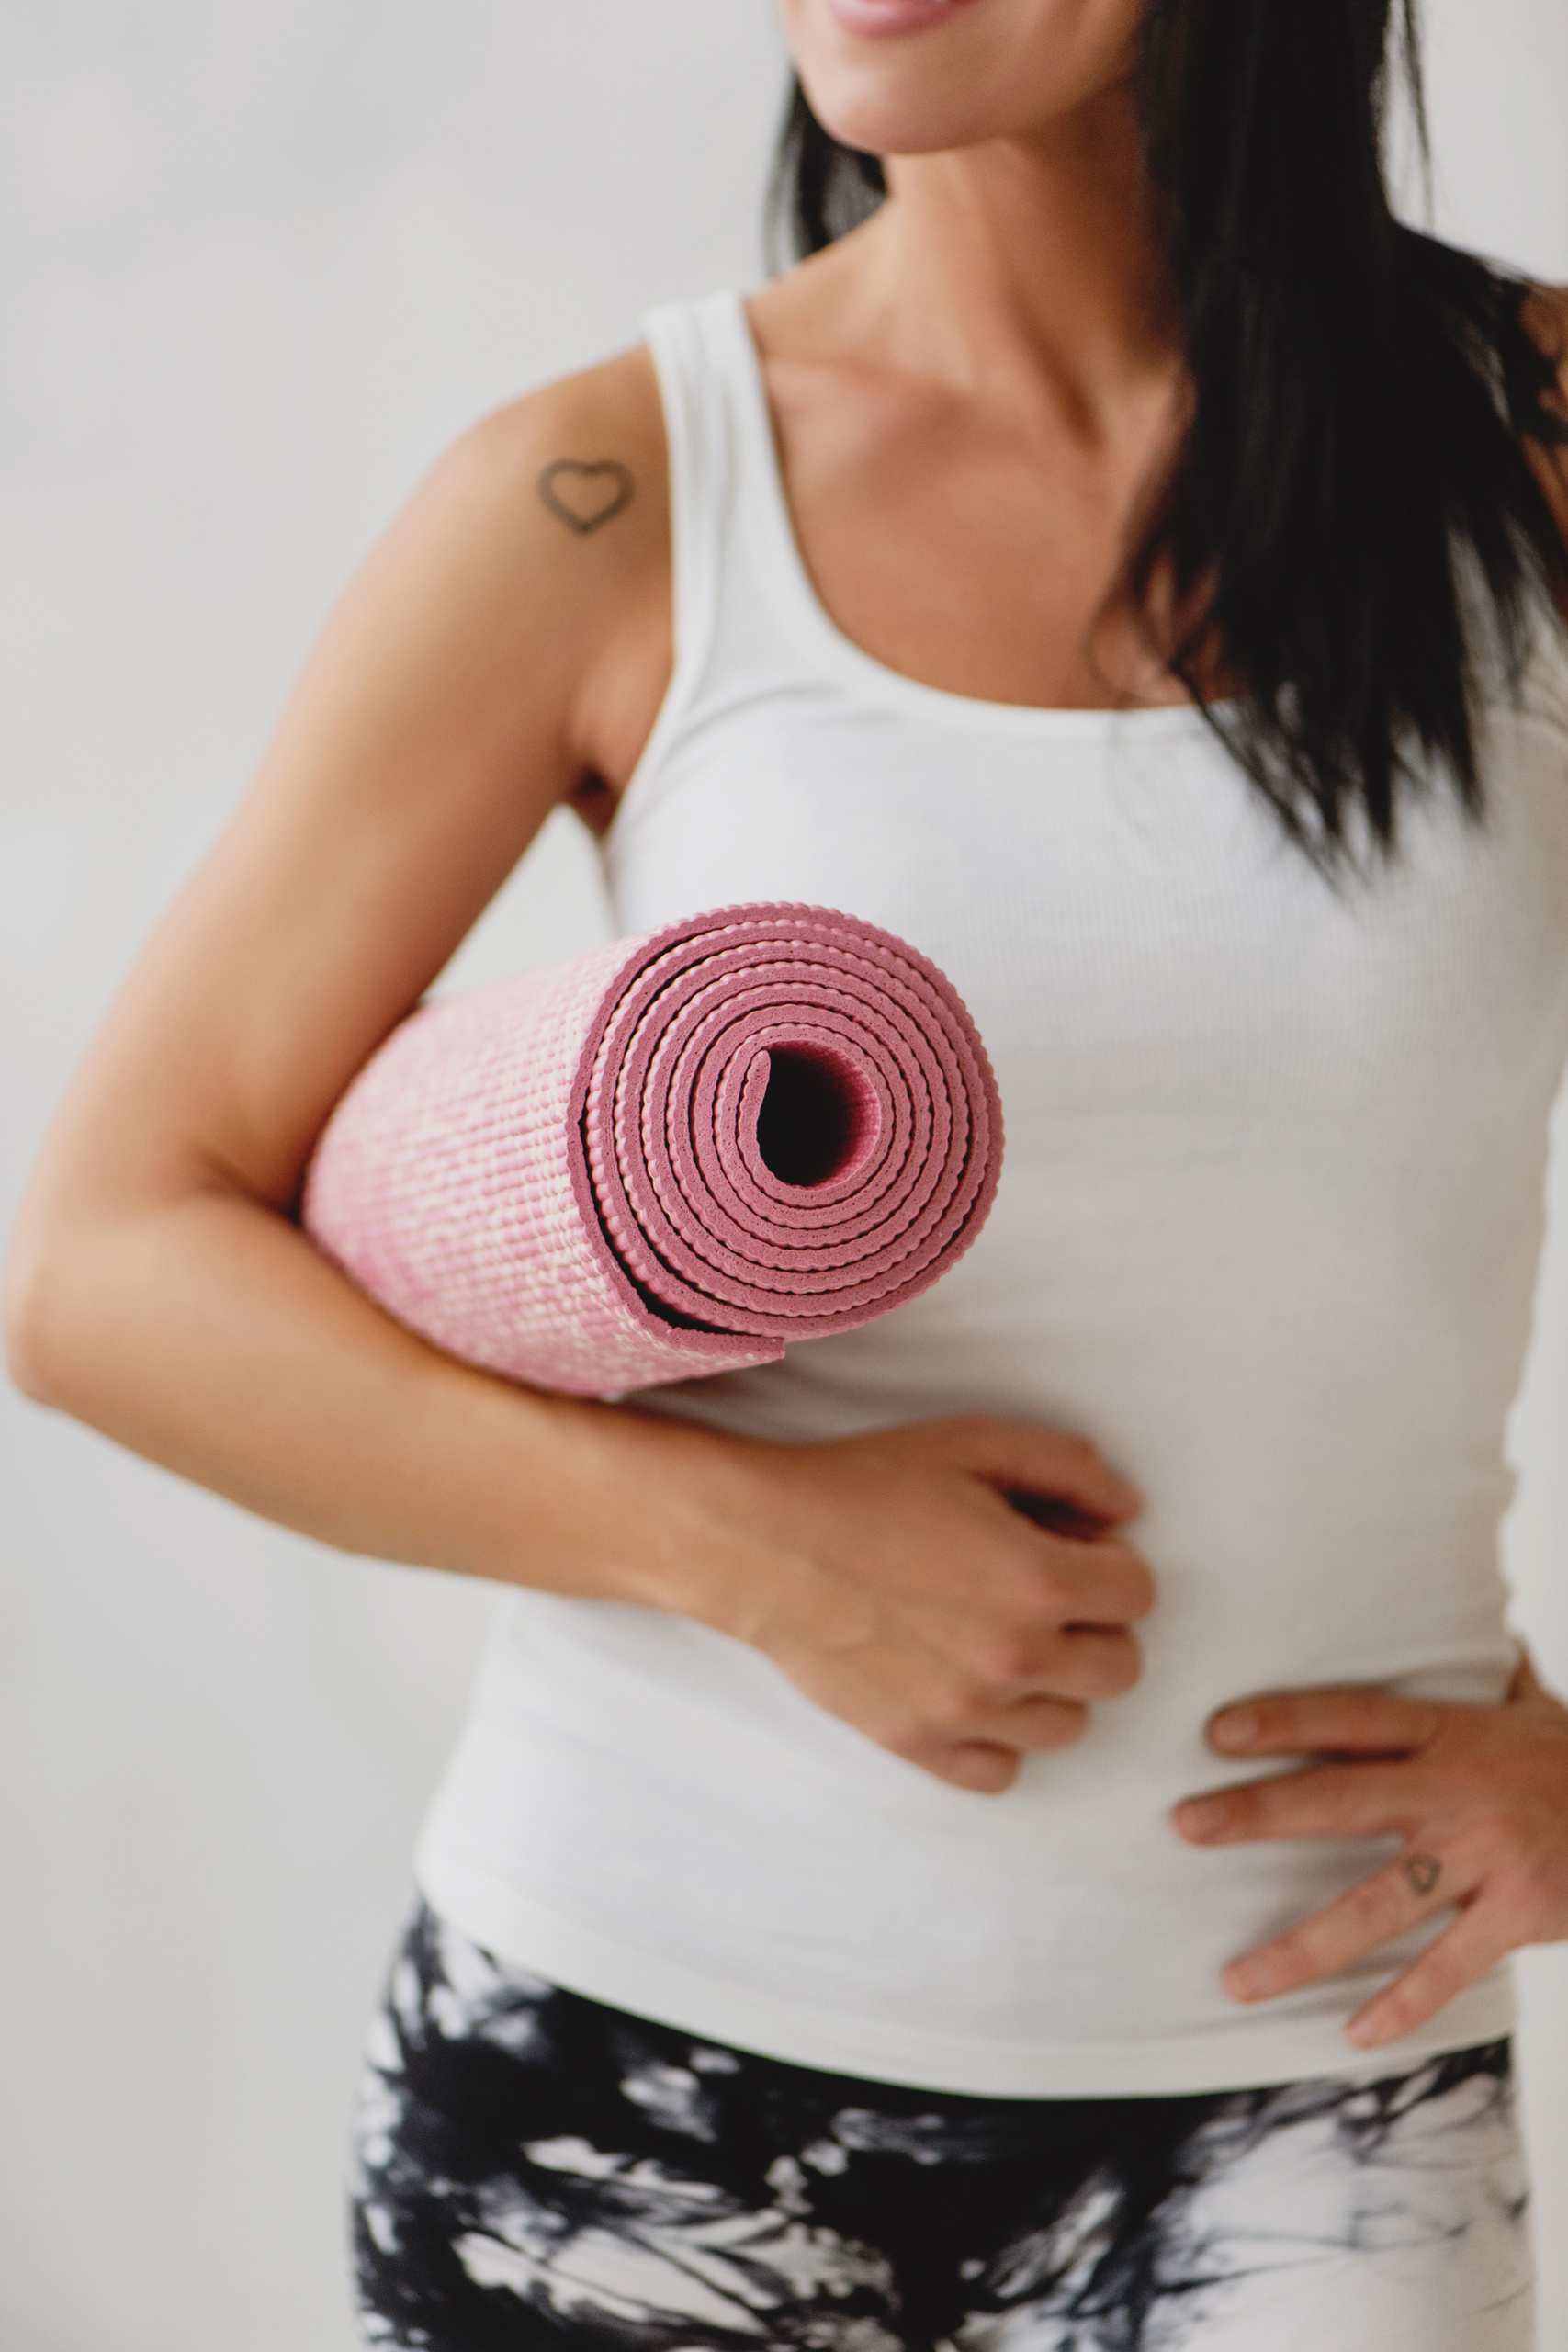 common menopause questions, Slim woman in white tank and marbled leggings with pink yoga mat